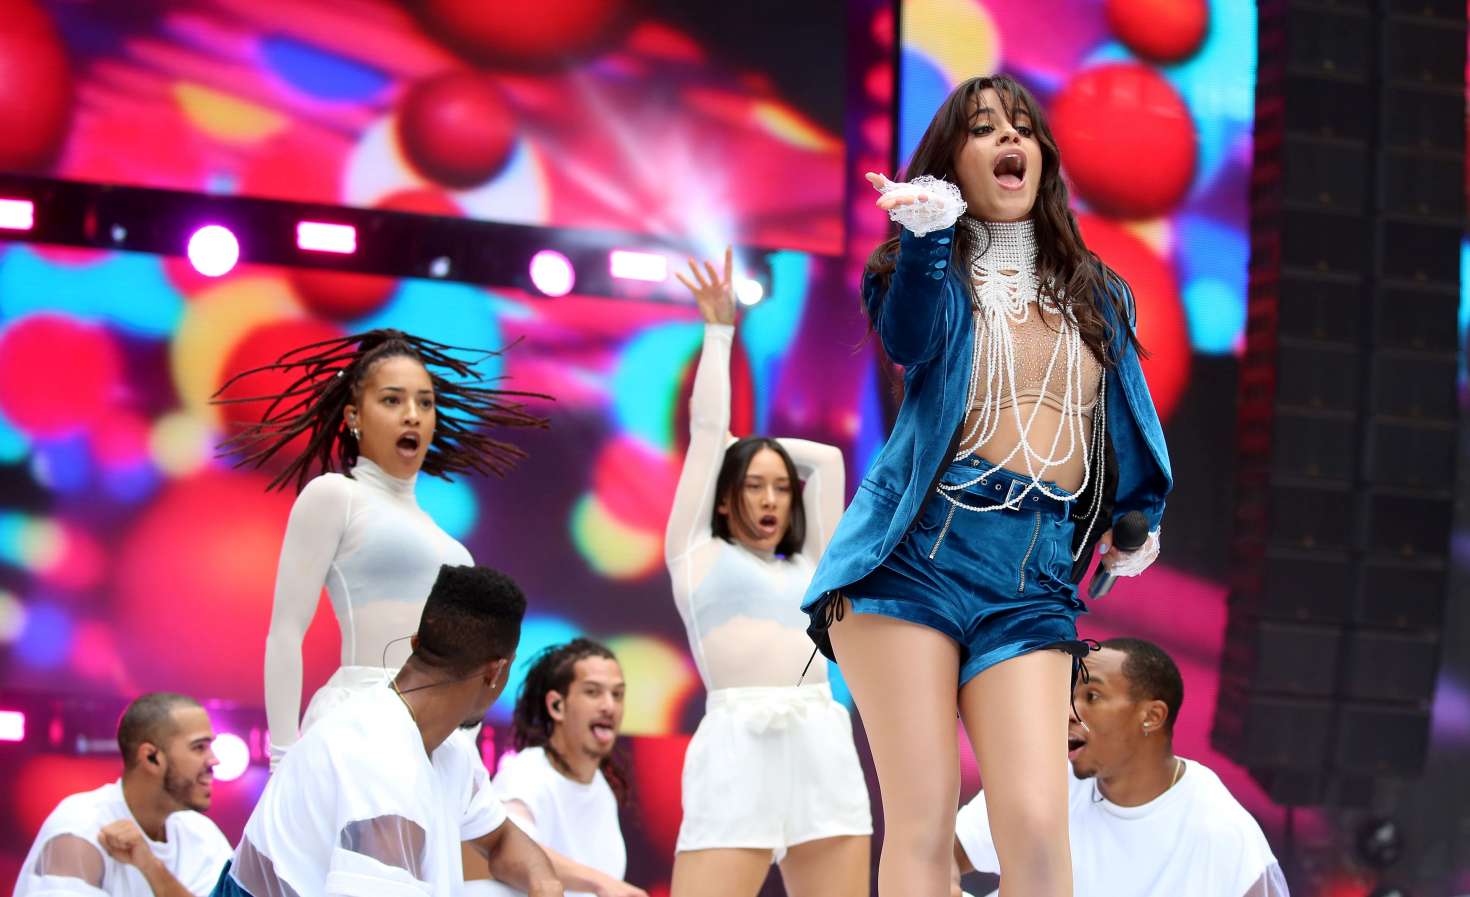 Camila Cabello â€“ Performing at Capitalâ€™s Summertime Ball in London